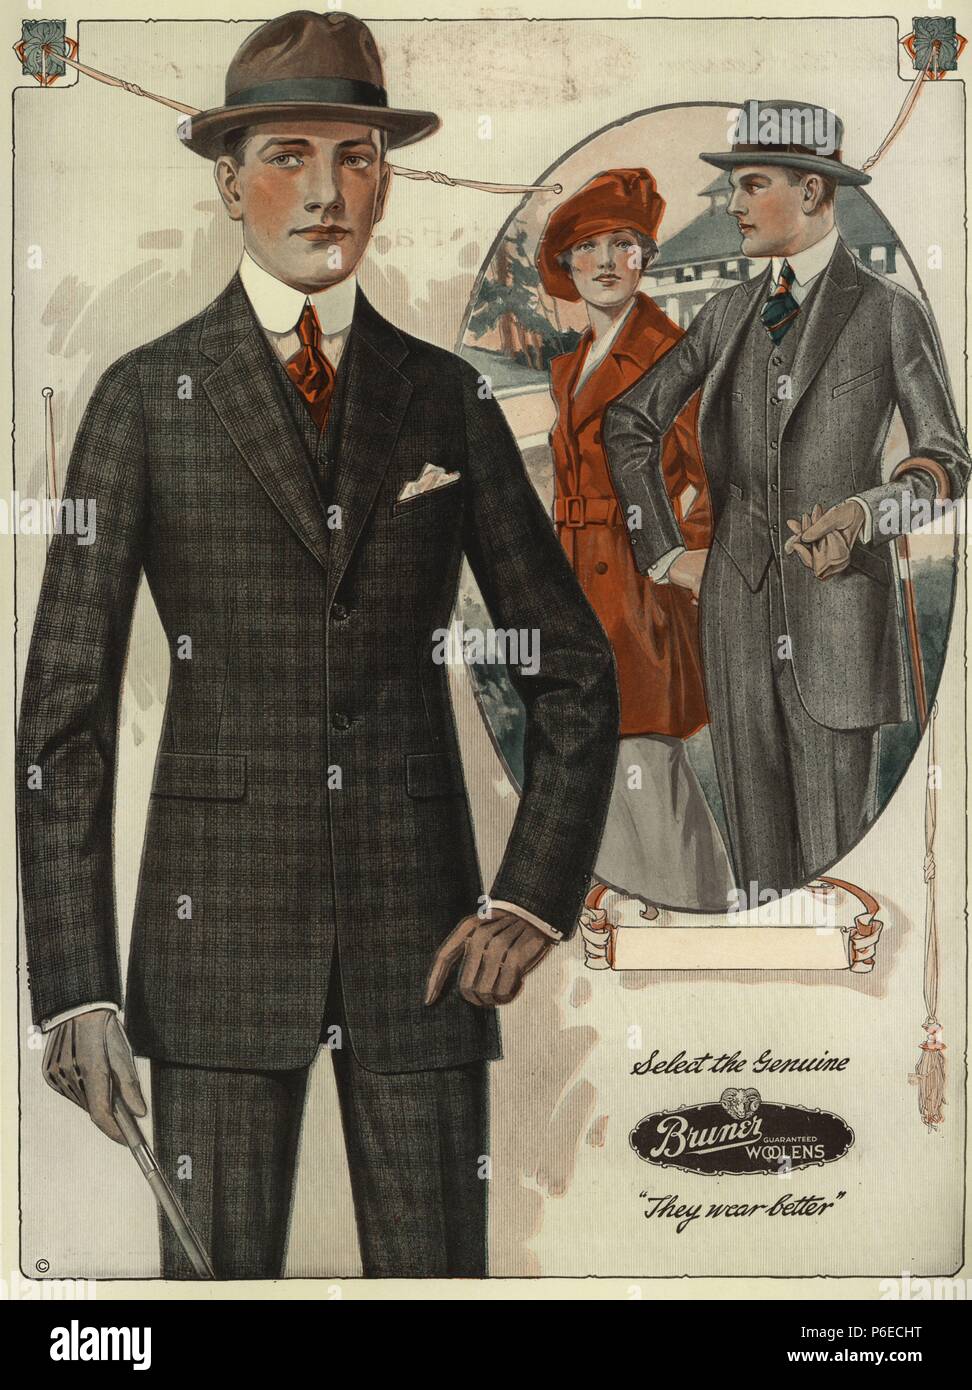 Men's conservative single-breasted suits. Chromolithograph from a catalog of male winter fashions from Bruner Woolens, 1920. Stock Photo